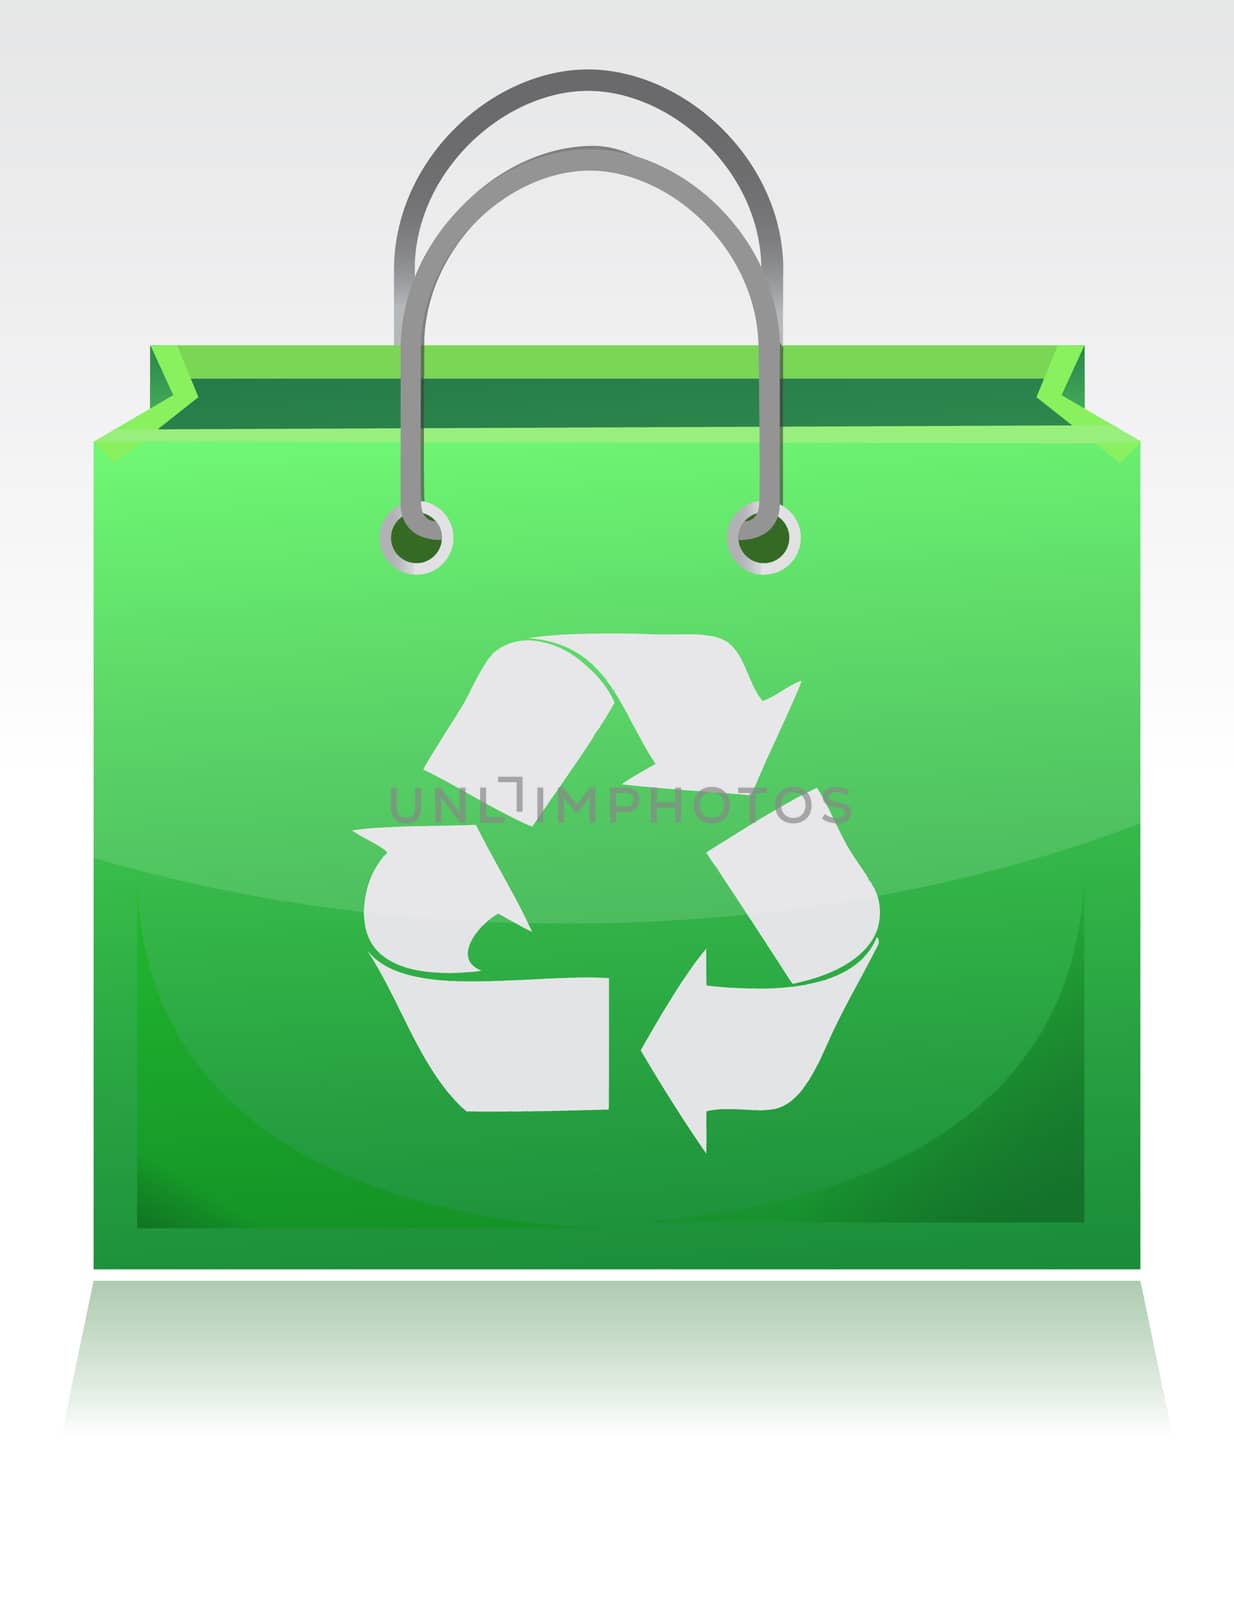 green recycle bag illustration isolated over a white background